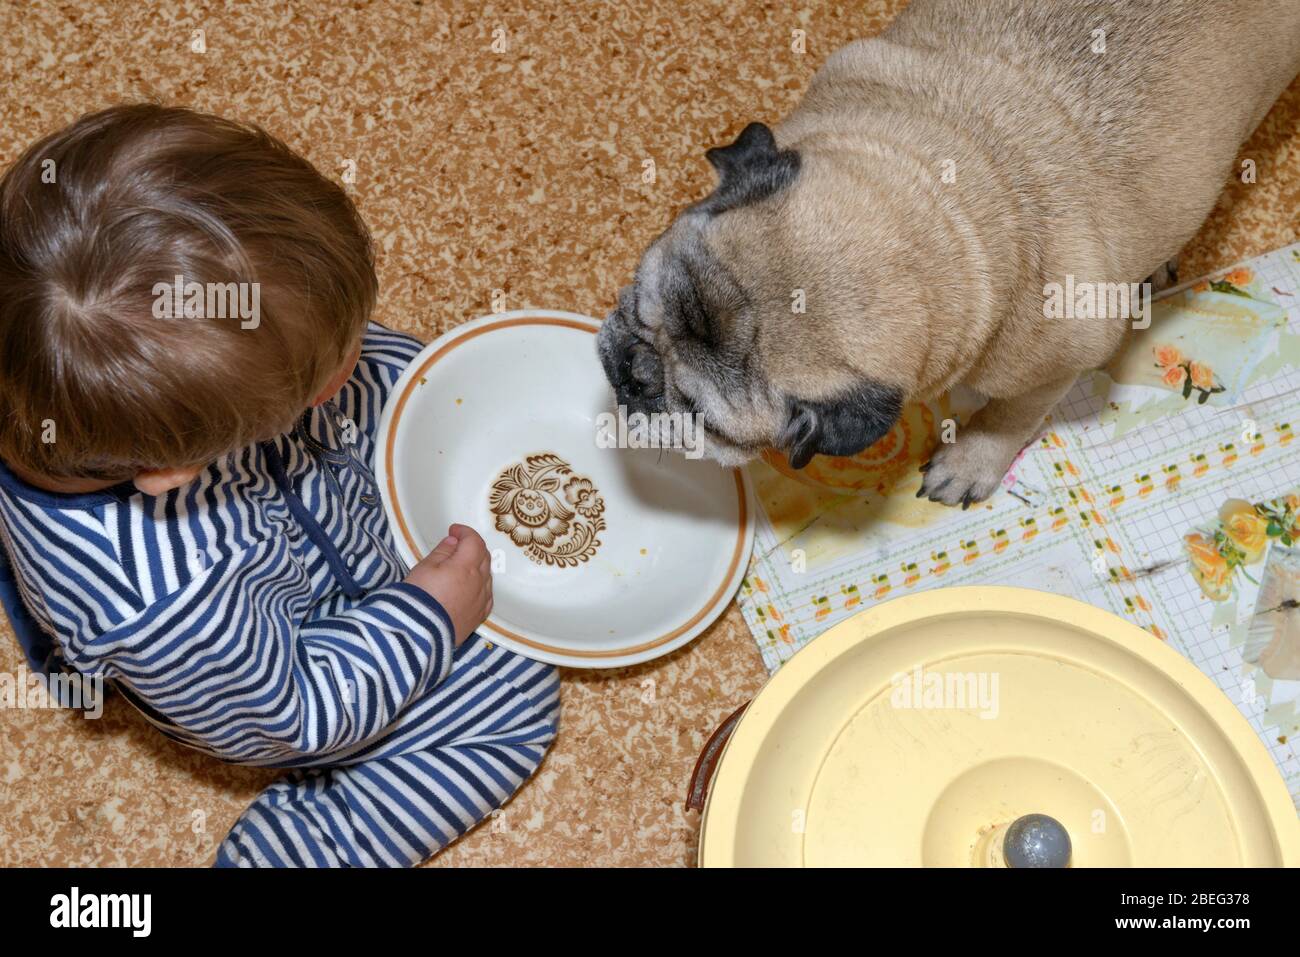 Close-up high angle little boy sitting on linoleum kitchen floor and old pug that are gazing fixedly at the empty bowl for feeding. Stock Photo